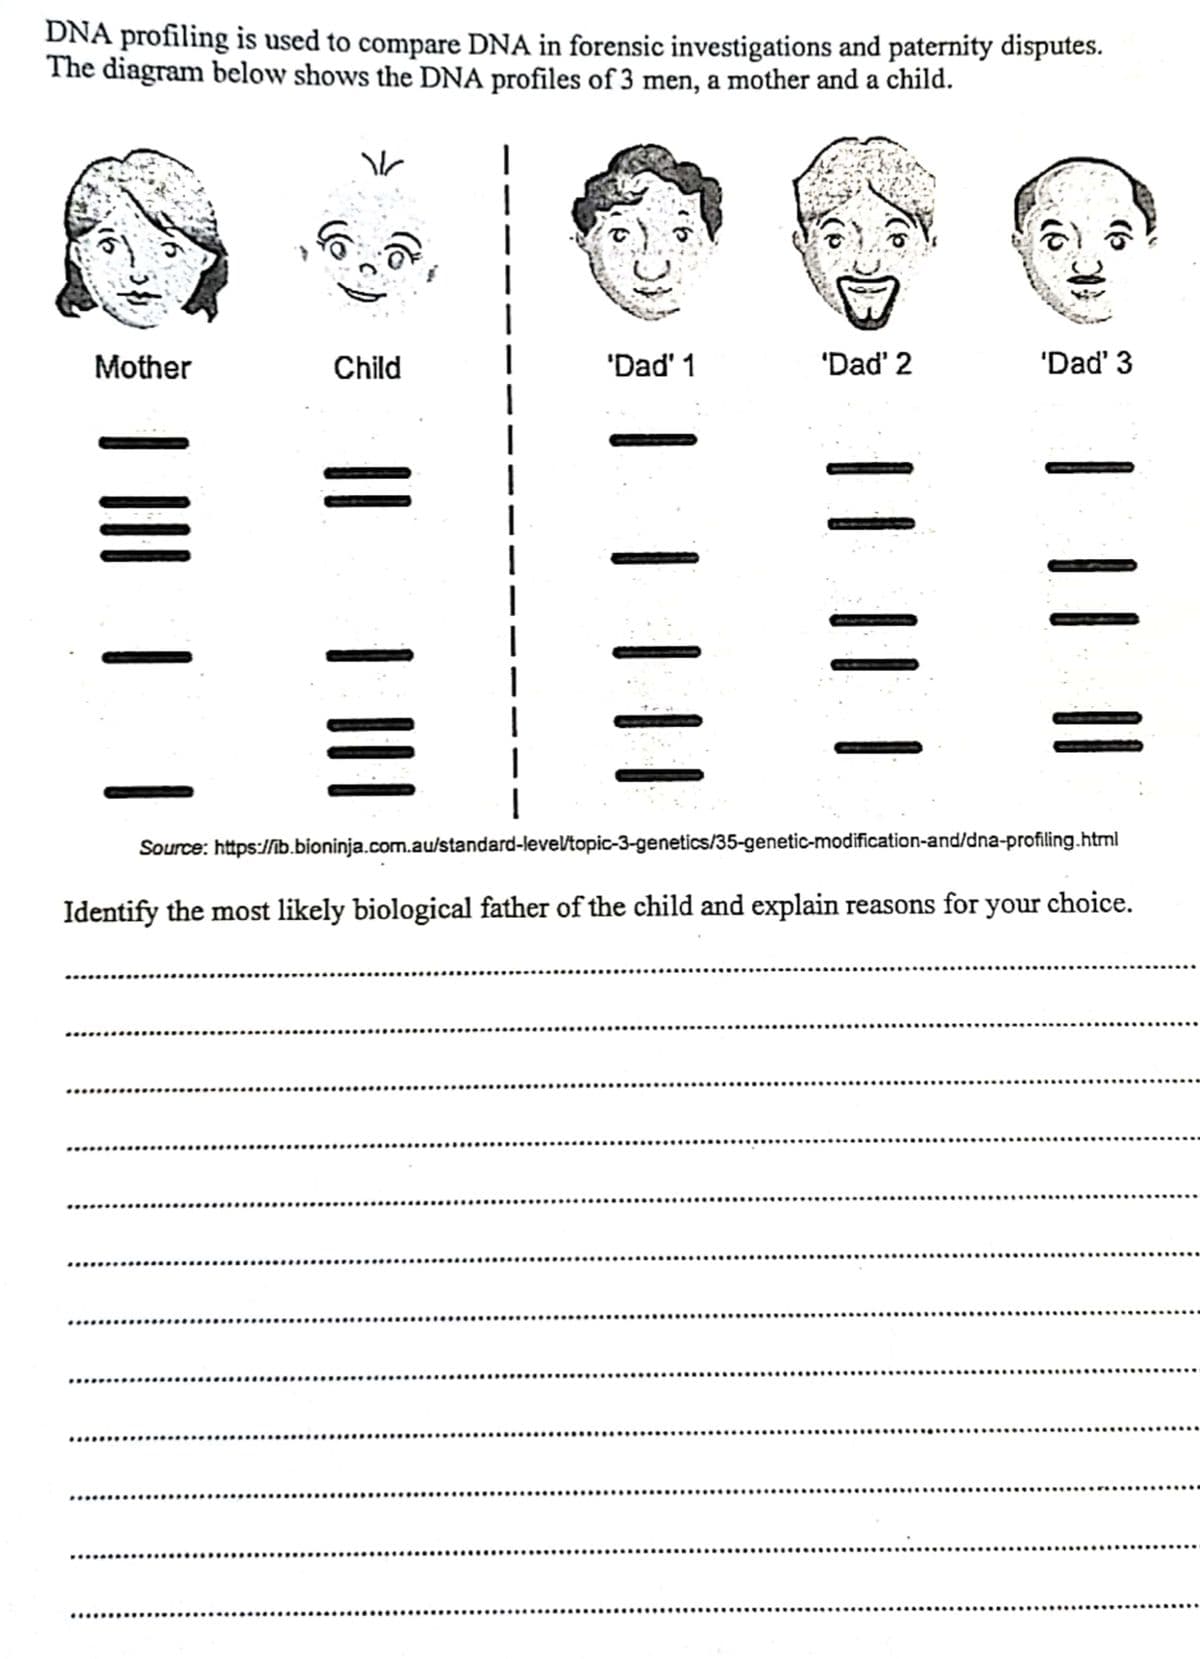 DNA profiling is used to compare DNA in forensic investigations and paternity disputes.
The diagram below shows the DNA profiles of 3 men, a mother and a child.
Mother
Co
Child
|| | |||
|
|
'Dad' 1
| | ||
'Dad' 2
છે)
(9)
(00
'Dad' 3
|| ||
Source:
https://ib.bioninja.com.au/standard-level/topic-3-genetics/35-genetic-modification-and/dna-profiling.html
Identify the most likely biological father of the child and explain reasons for your choice.